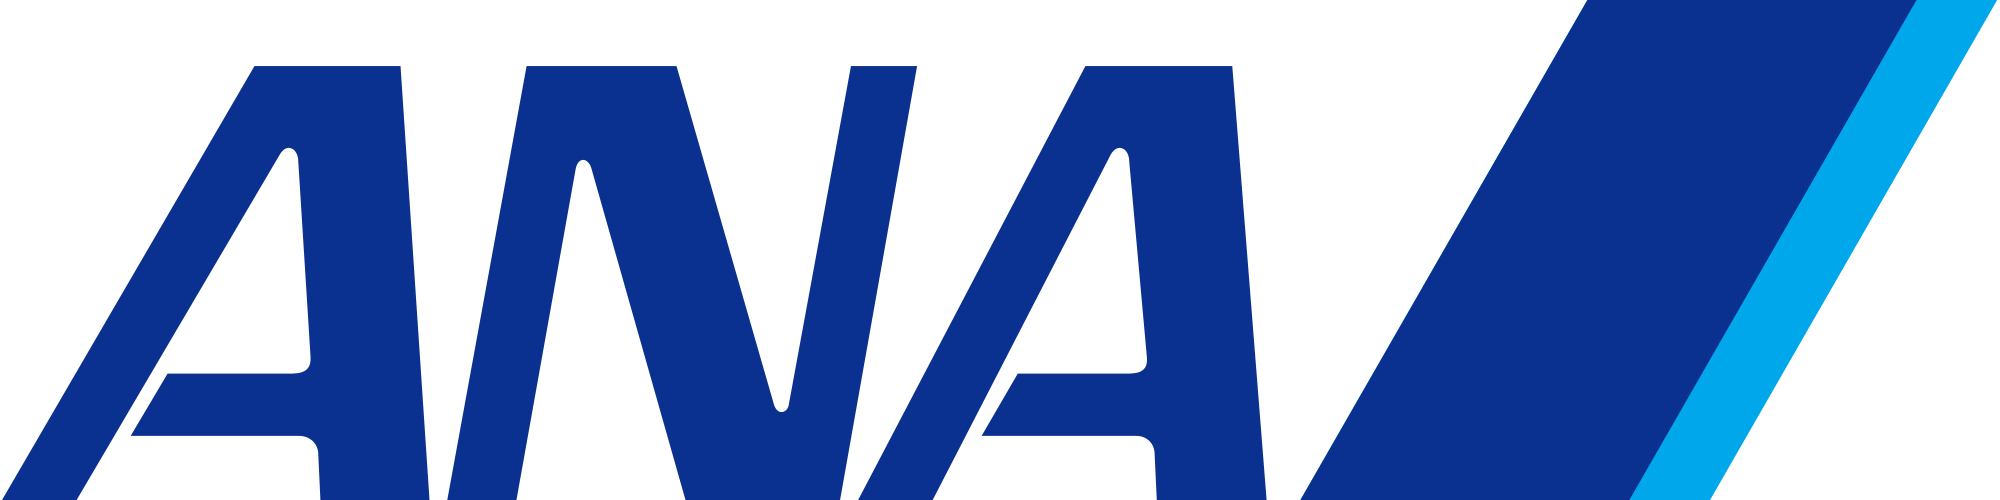 Japanese Airline Logo - All Nippon Airways | Peanuts Wiki | FANDOM powered by Wikia